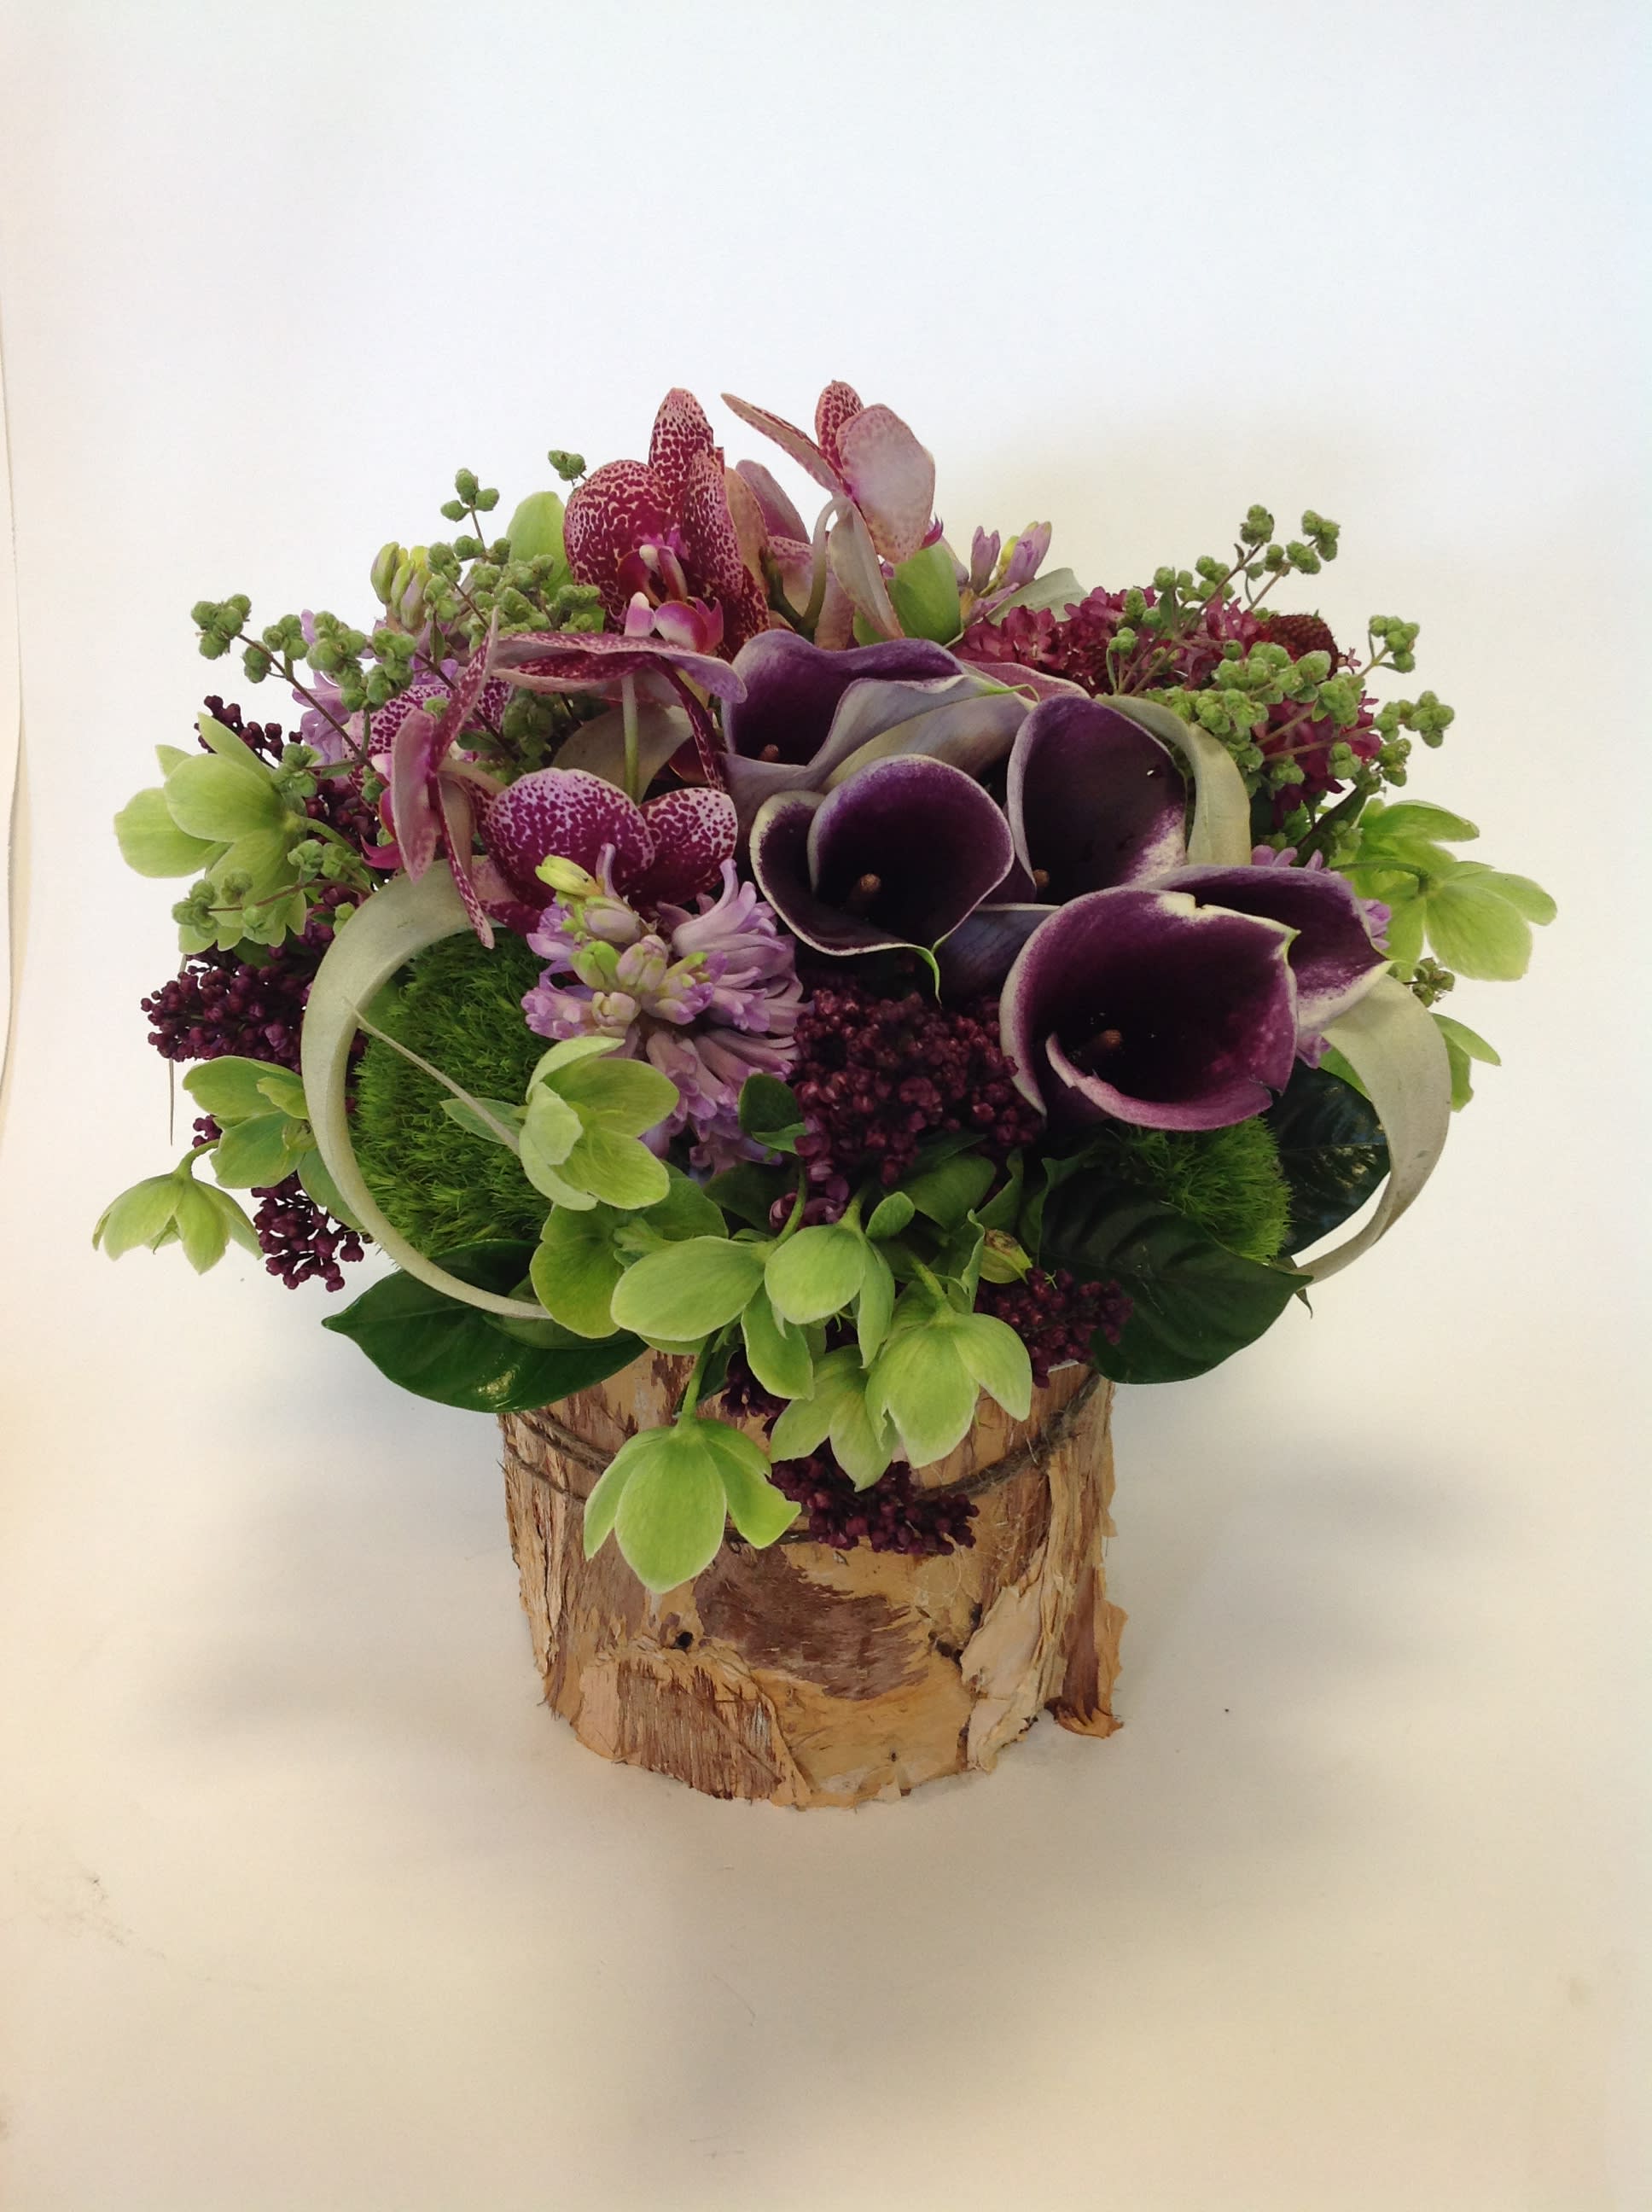 Earthy Prince - Breathtaking and stunning is the only way to describe this arrangement. A mixed bouquet of Calla lilies, Hyacinths, Orchids and Dianthus. The unique vase only adds to its beauty.  